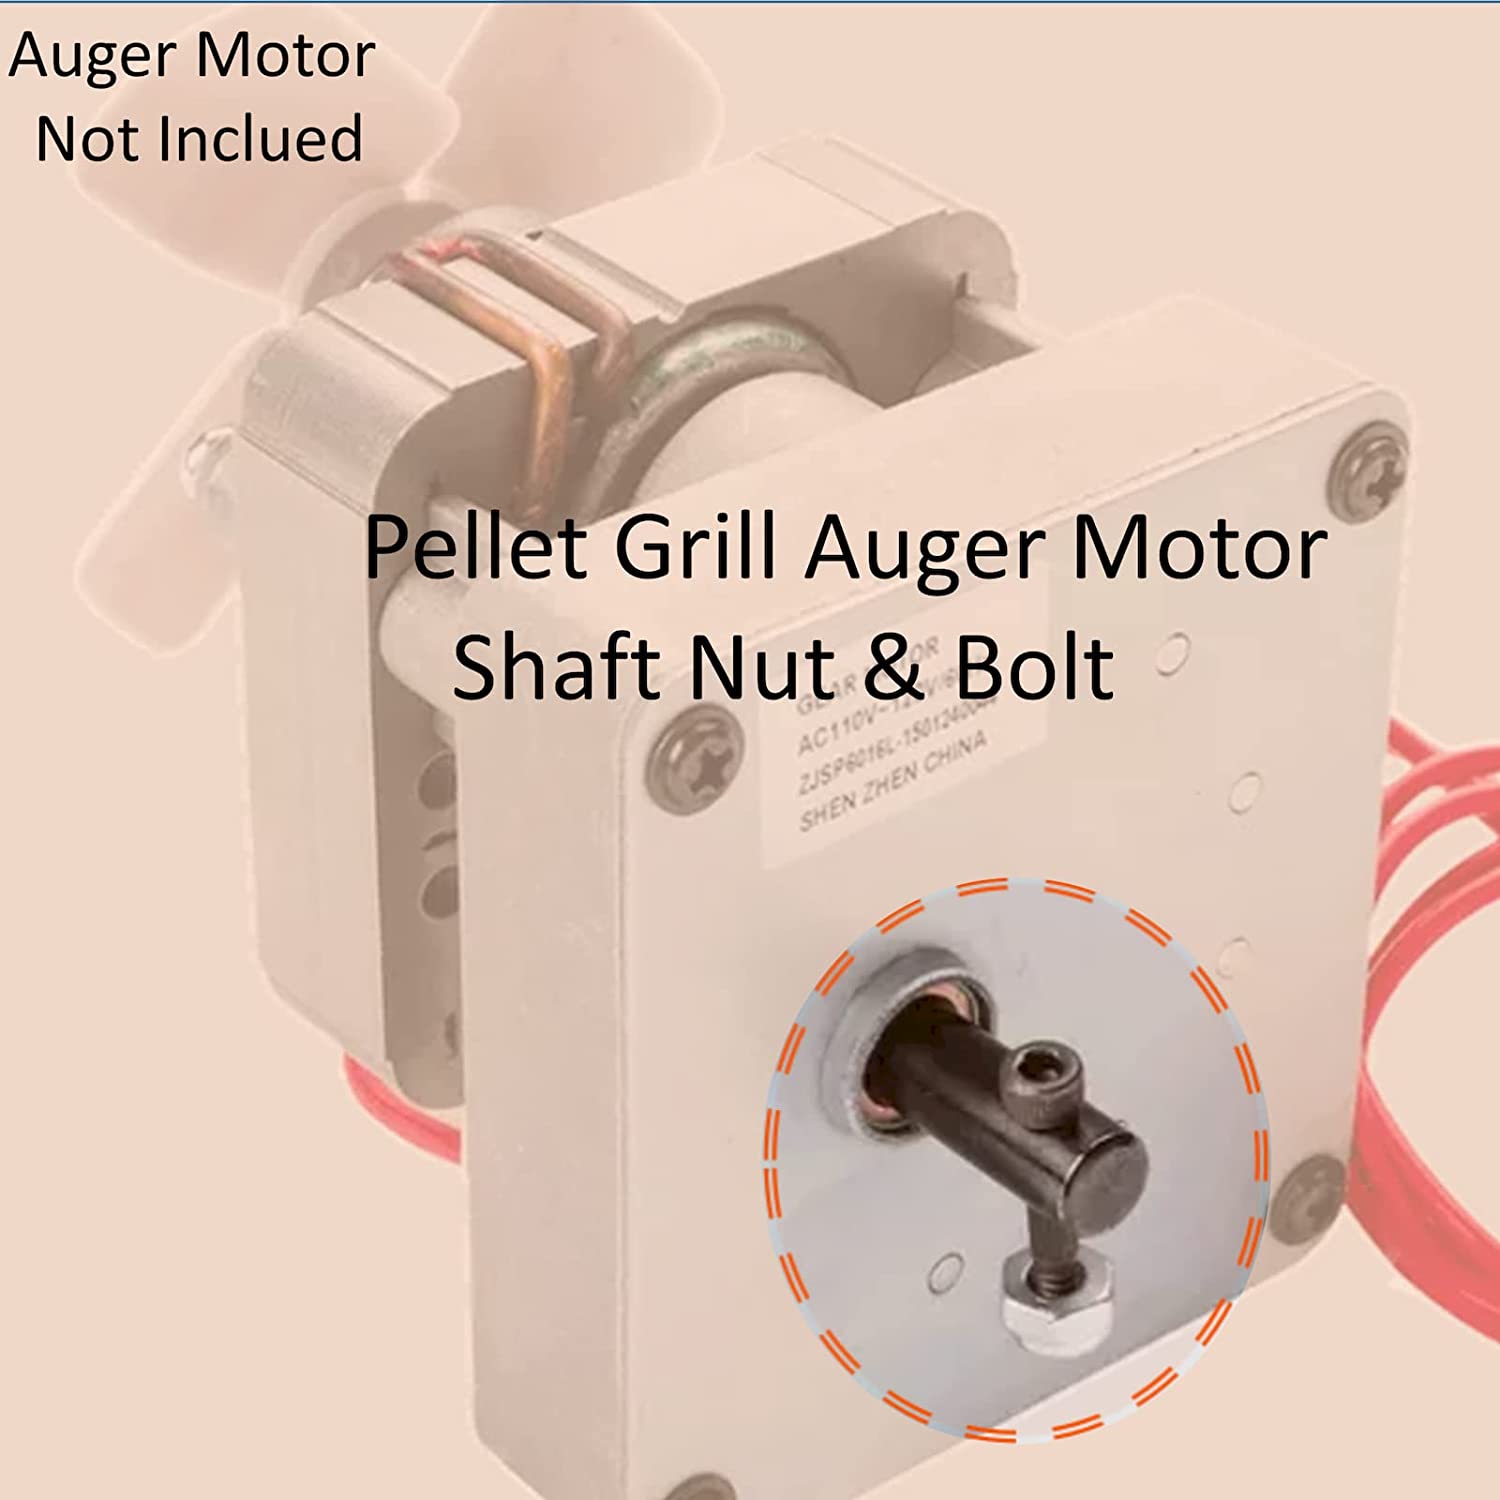 BIG PART Replacement Auger Motor Shaft Nut & Bolt for Most of AC Pellet Grill,As Traeger/Pit Boss/Z Grills Wood Pellet Grills,etc